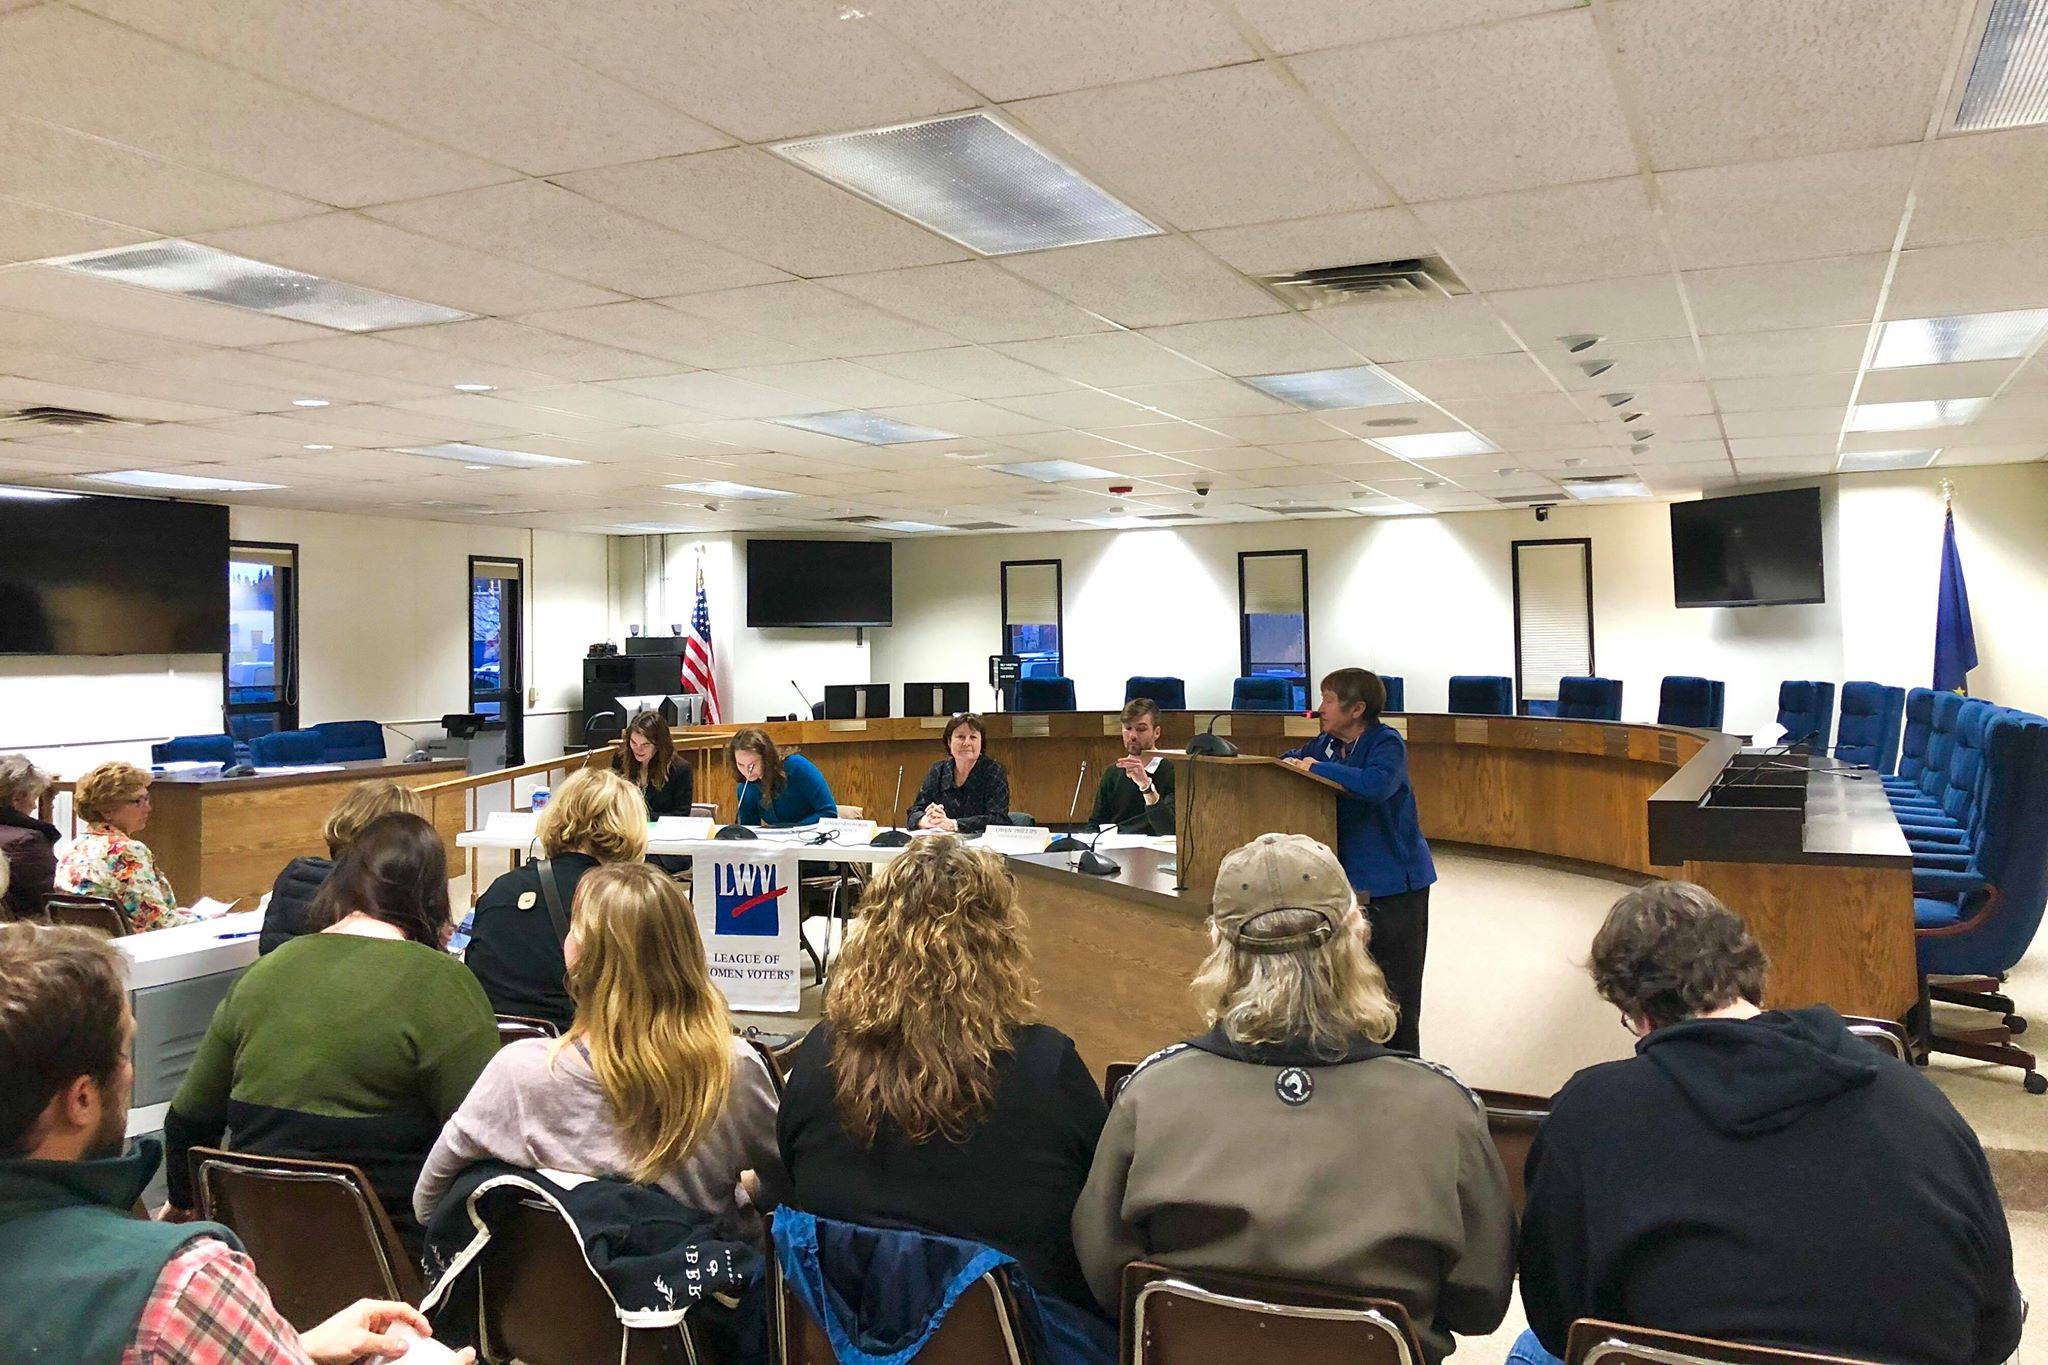 Panelists, Kaitlin Vadla, Laura Rhyne, Linda Hutchings and Owen Phillips present information about Alaska Ballot Measure 1 at an event hosted by the League of Women Voters on Thursday, Oct. 25, 2018, in Soldotna, AK. (Photo by Victoria Petersen/Peninsula Clarion)